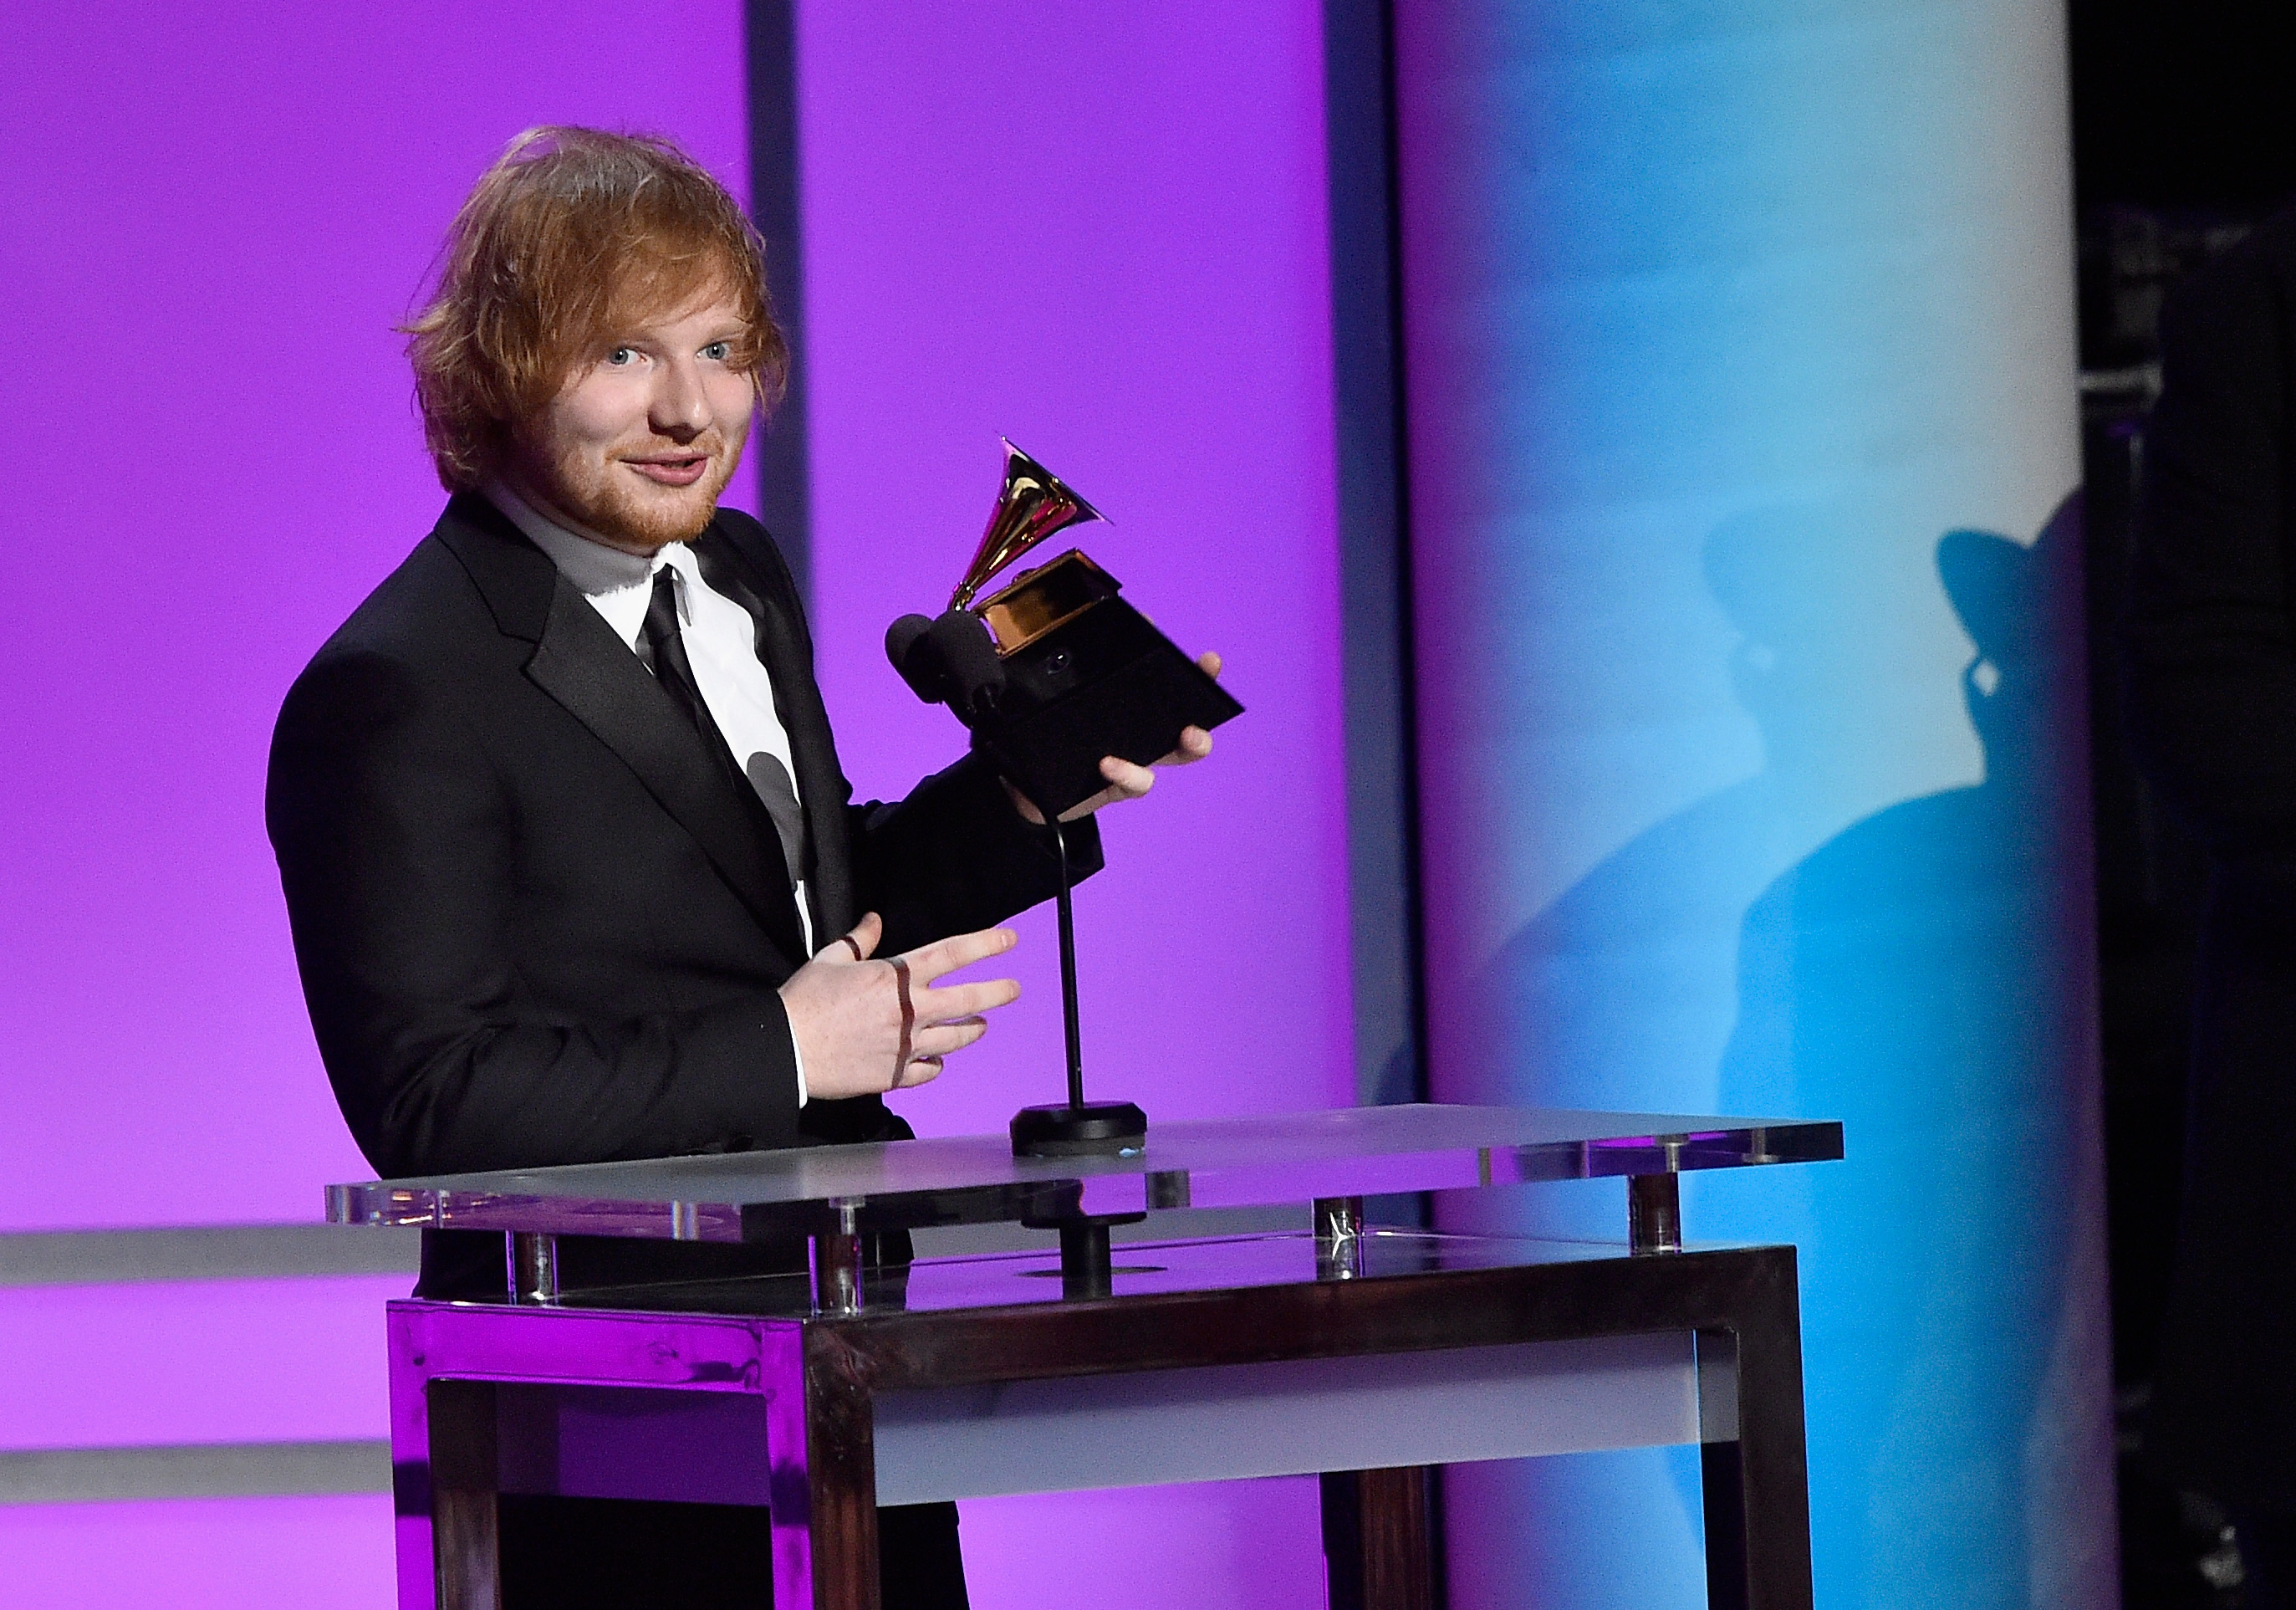 Singer-songwriter Ed Sheeran accepts the Grammy Award for Best Pop Solo Performance, for "Thinking Out Loud," onstage during the GRAMMY Pre-Telecast at The 58th GRAMMY Awards at Microsoft Theater on February 15, 2016 in Los Angeles, California.